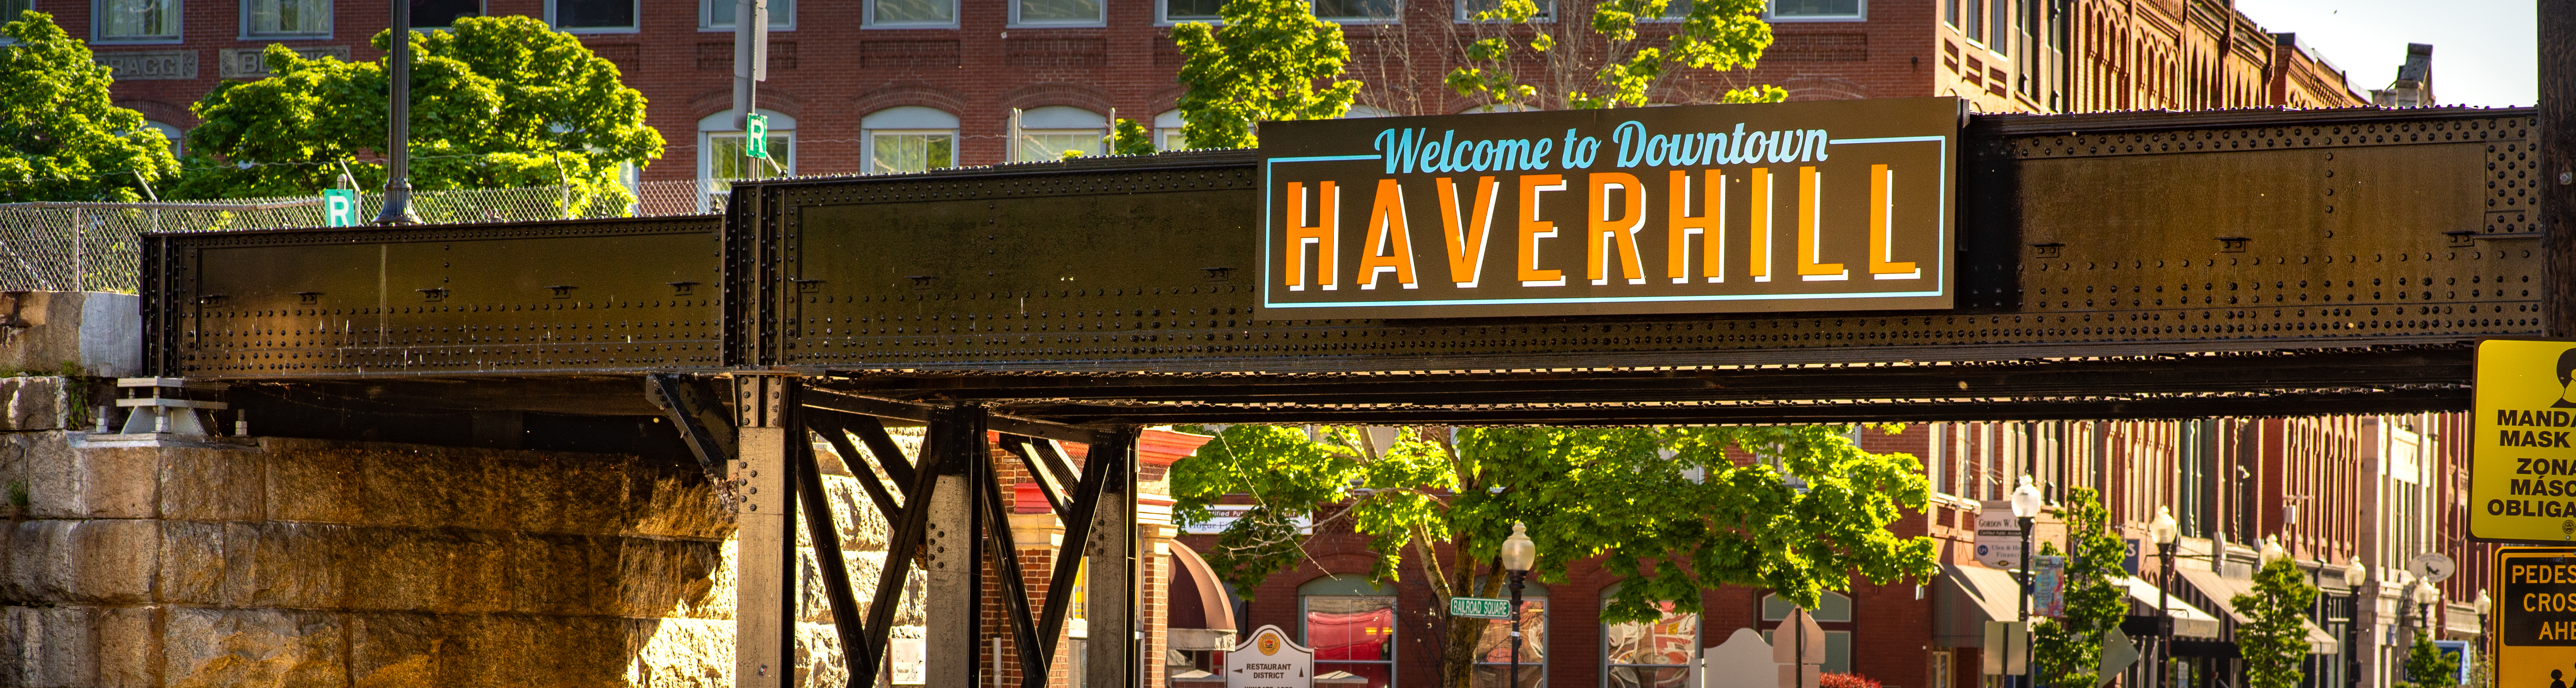 Downtown_haverhill_banner.png